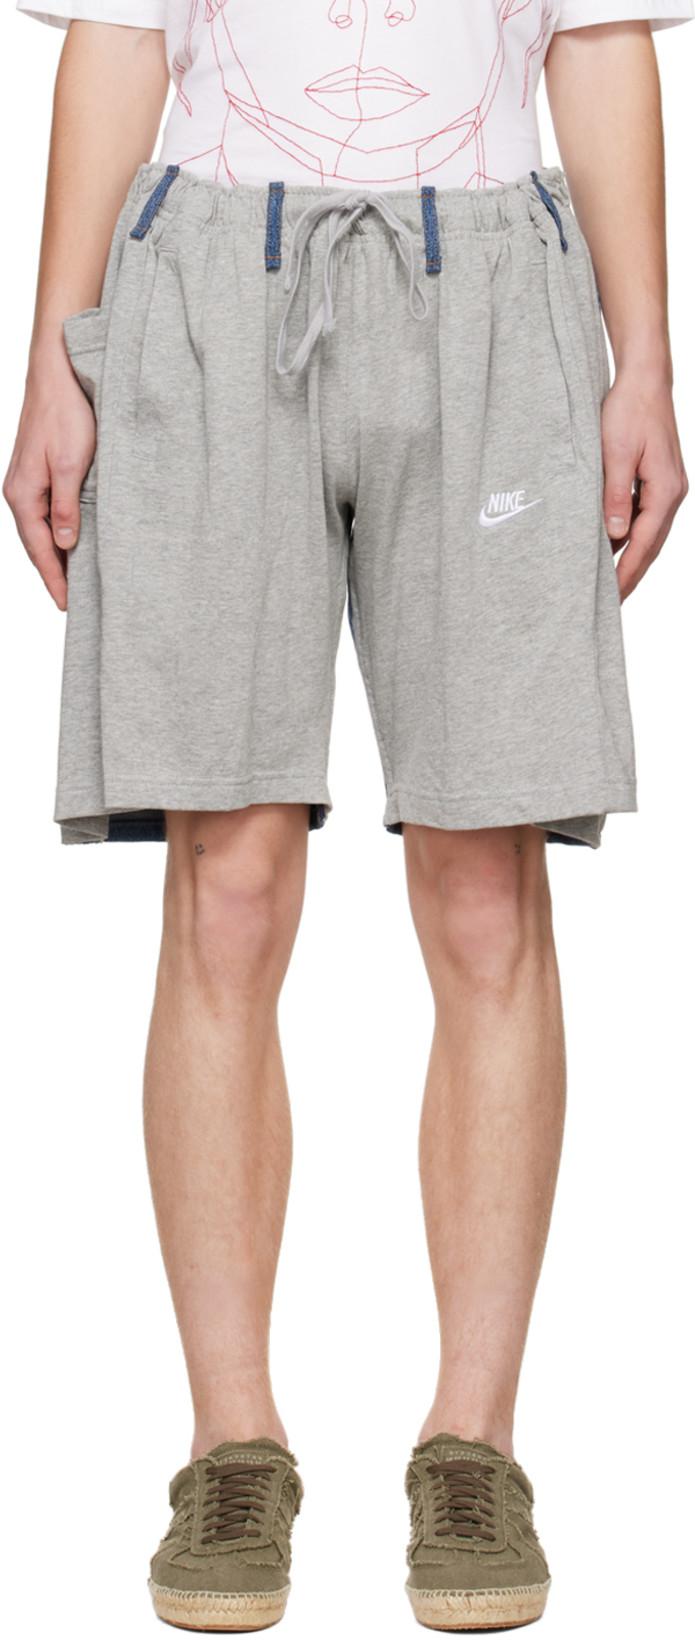 SSENSE Exclusive Levi's & Nike Edition Gray & Blue Overjogging Shorts by BLESS